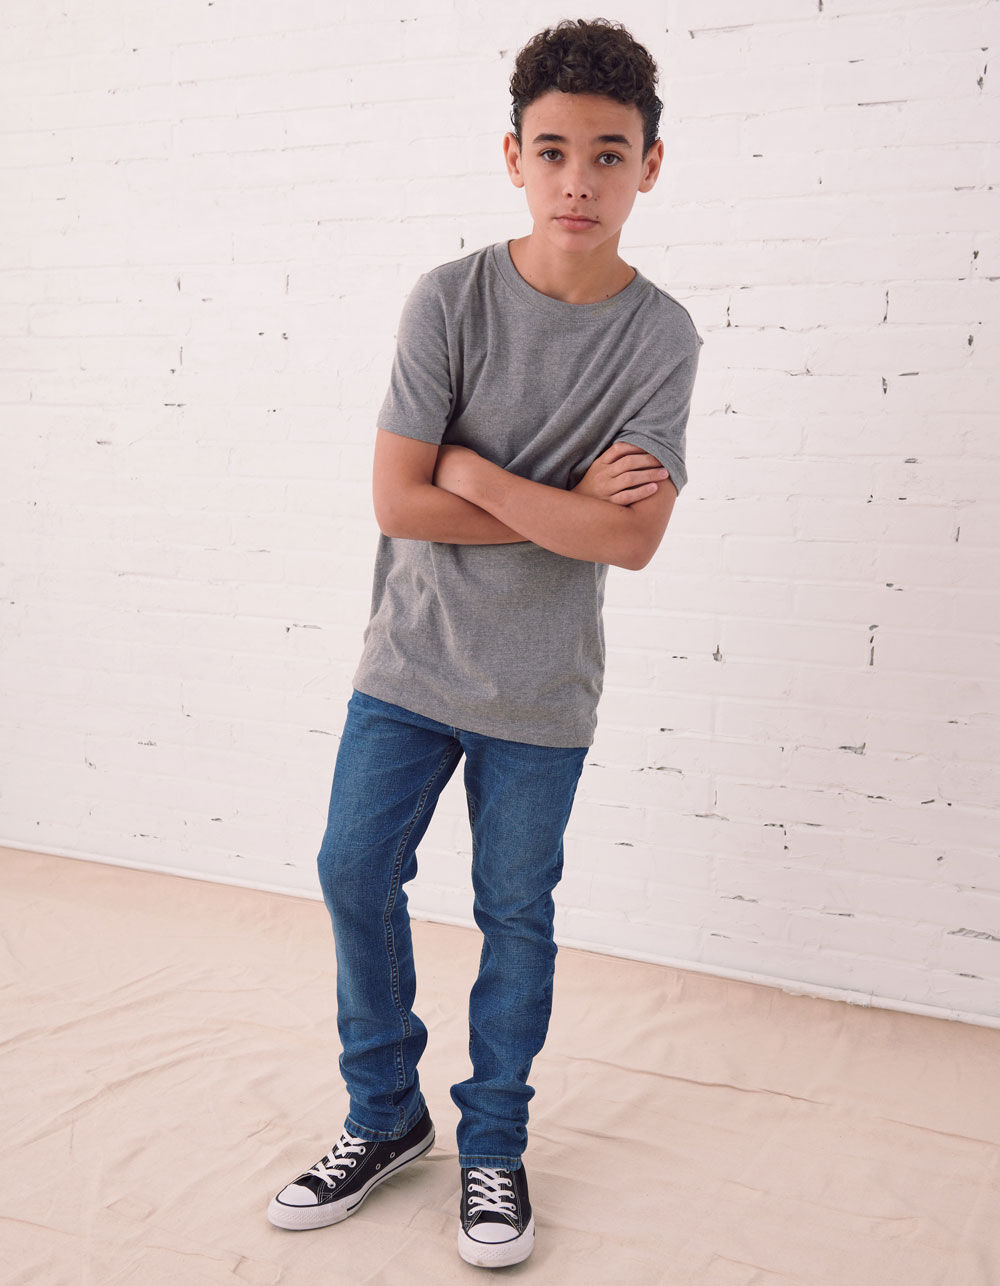 Boys' Jeans: Ripped, Skinny & More | Tillys